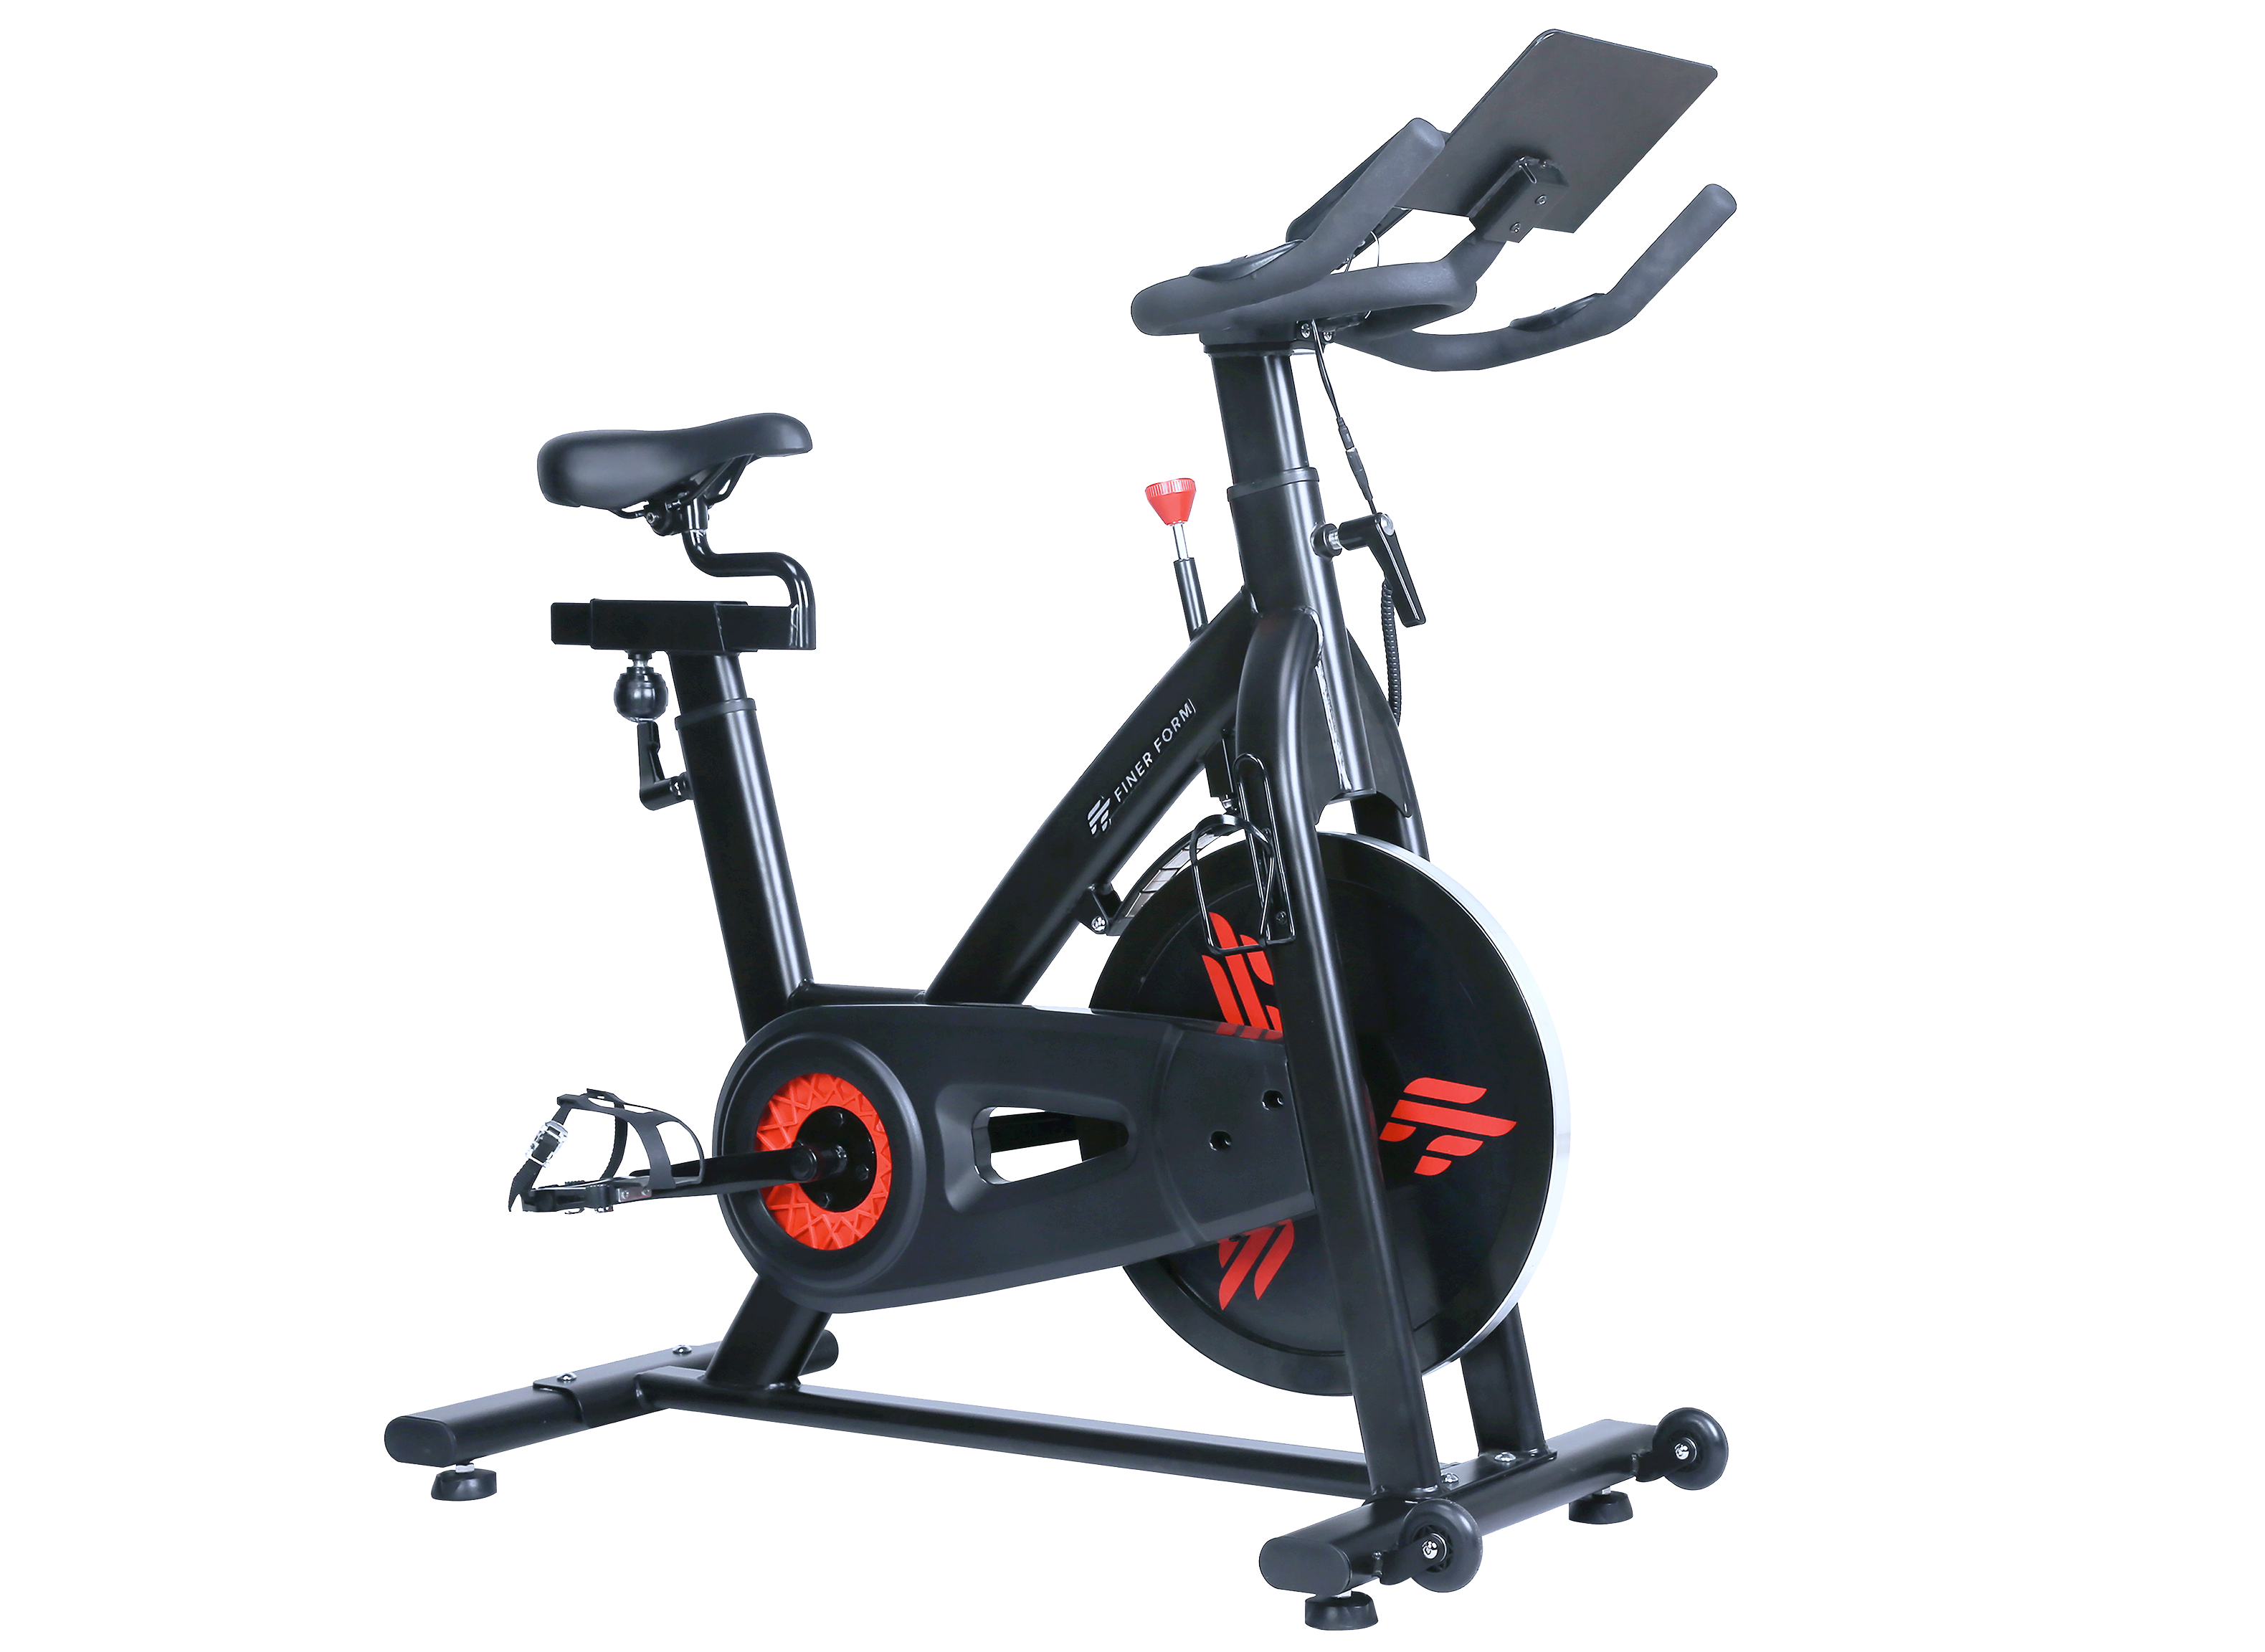 https://crdms.images.consumerreports.org/prod/products/cr/models/403260-connected-exercise-bikes-finer-form-indoor-exercise-bike-10018690.png